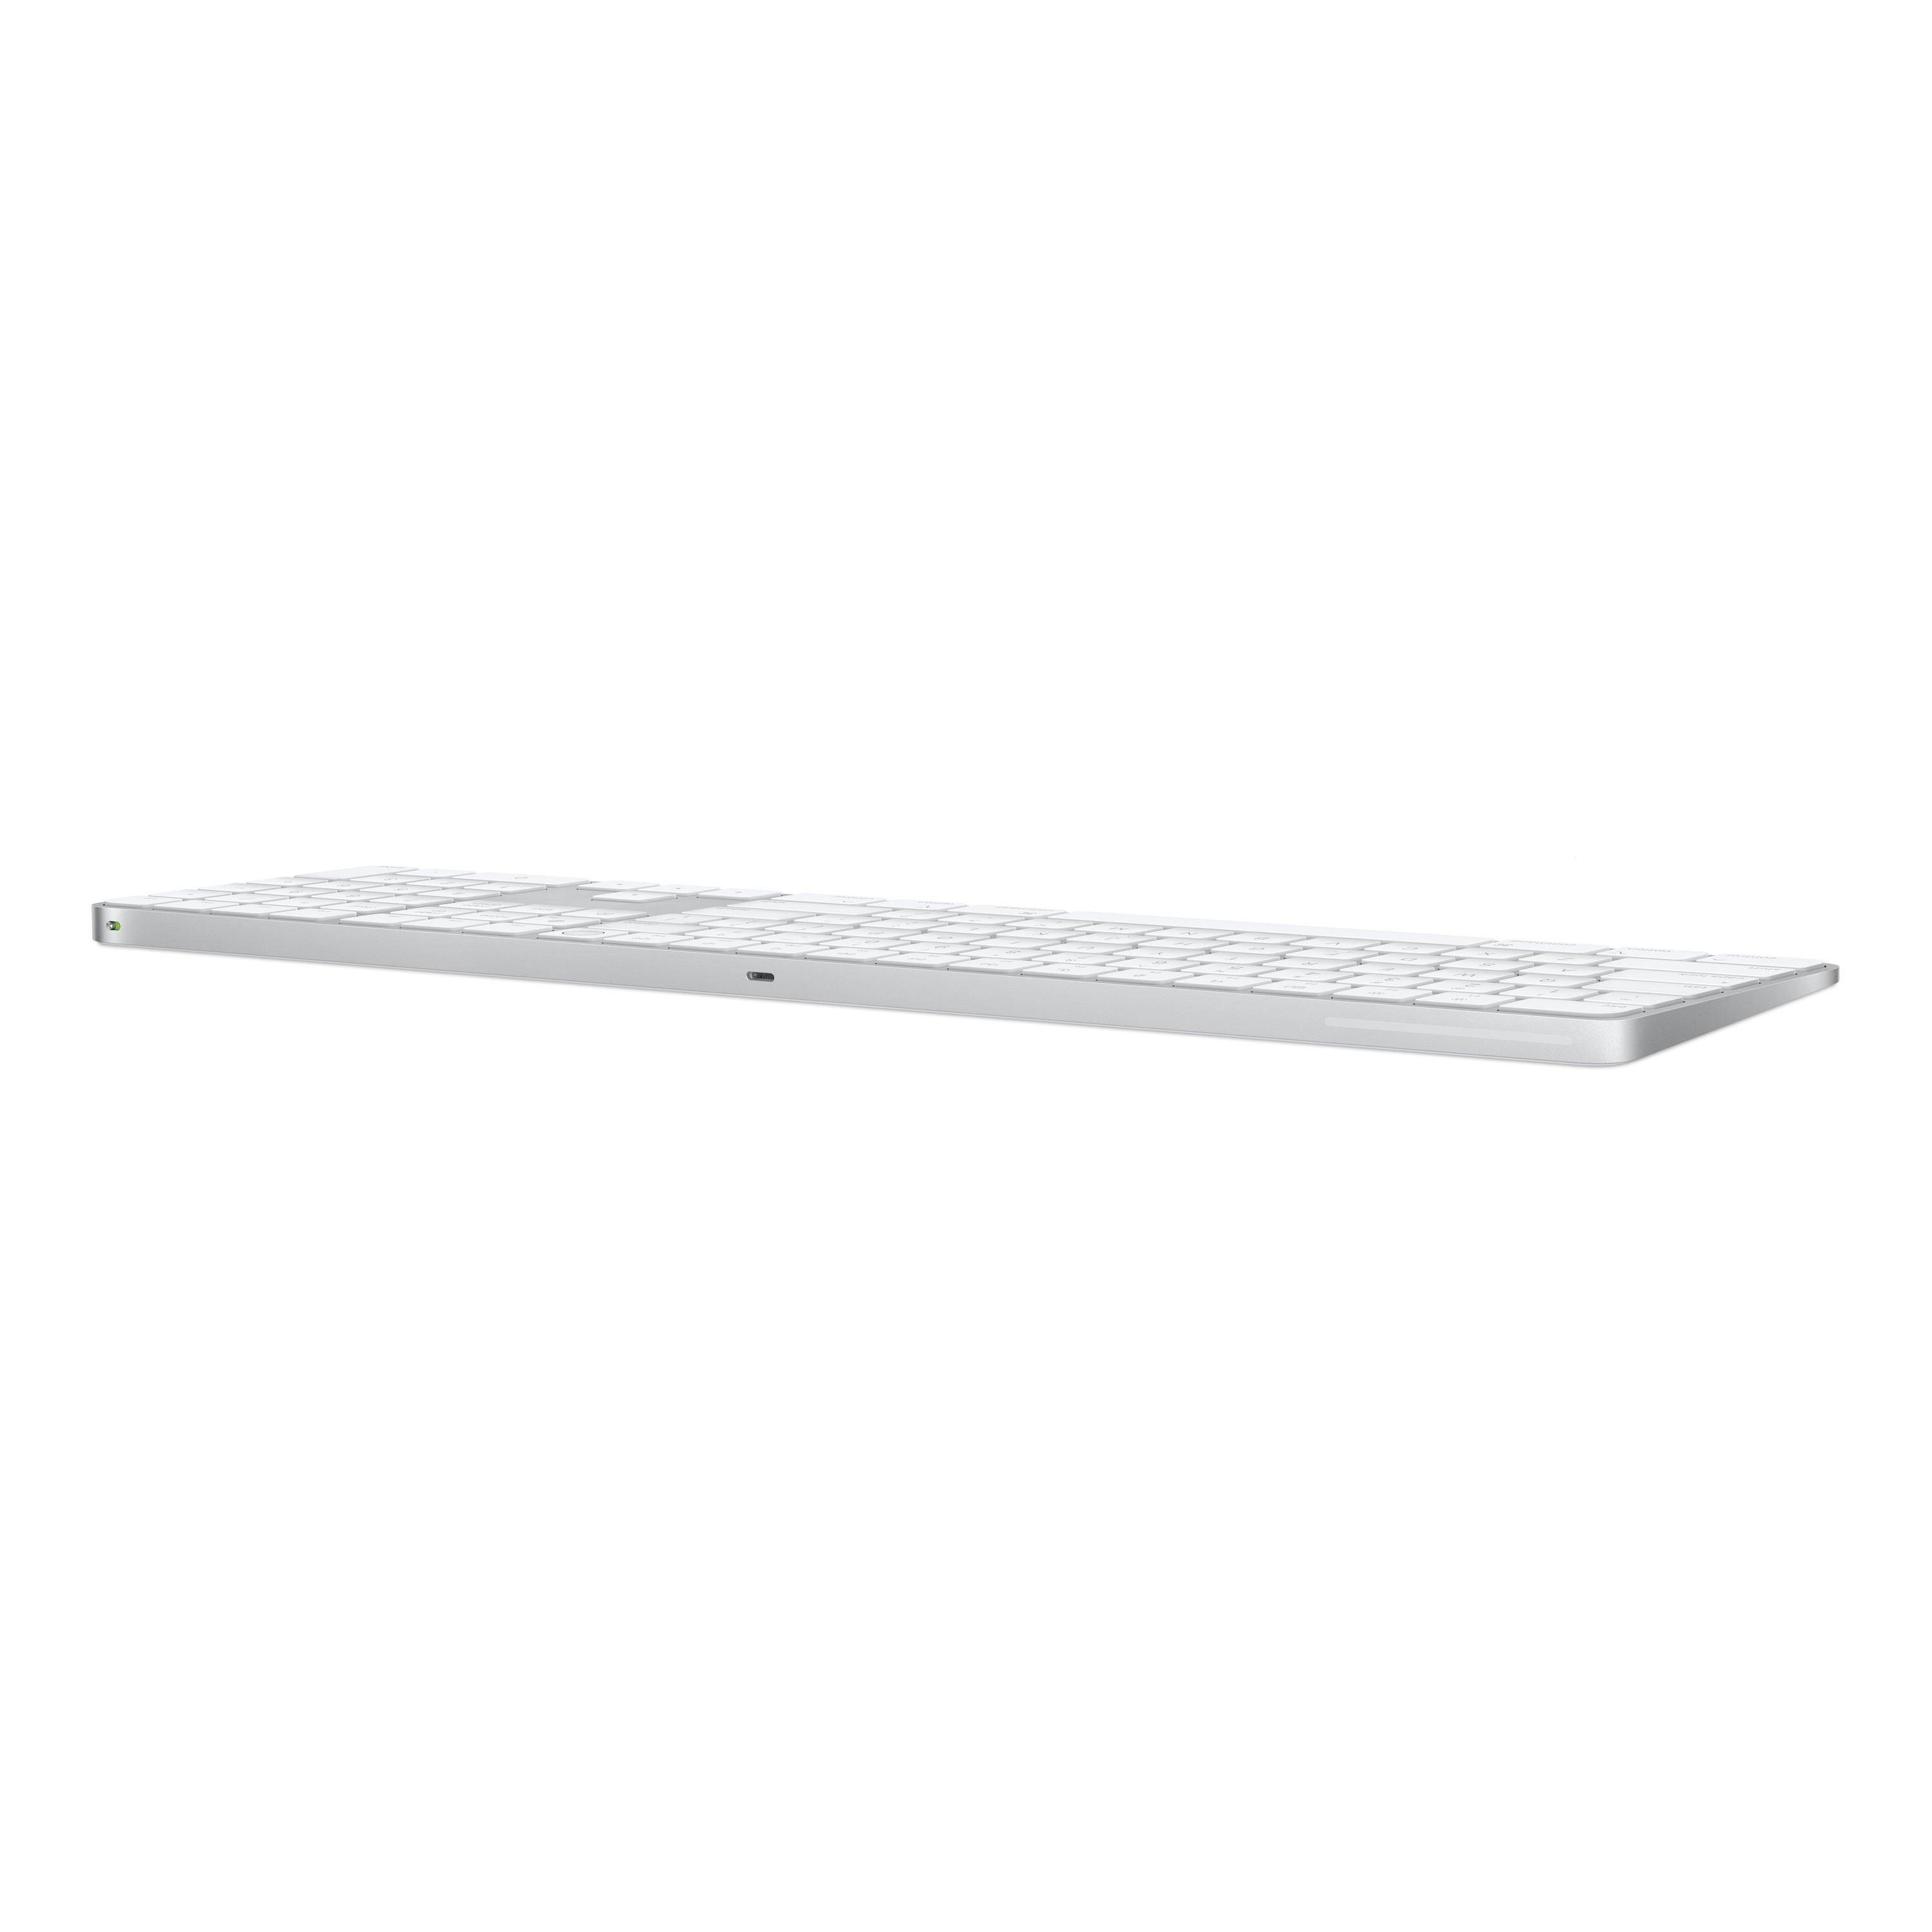 Apple Magic Keyboard with Touch ID and Numeric Keypad - Tastatur - Bluetooth, USB-C - QWERTY - Norwegisch - für iMac (Anfang 2021)